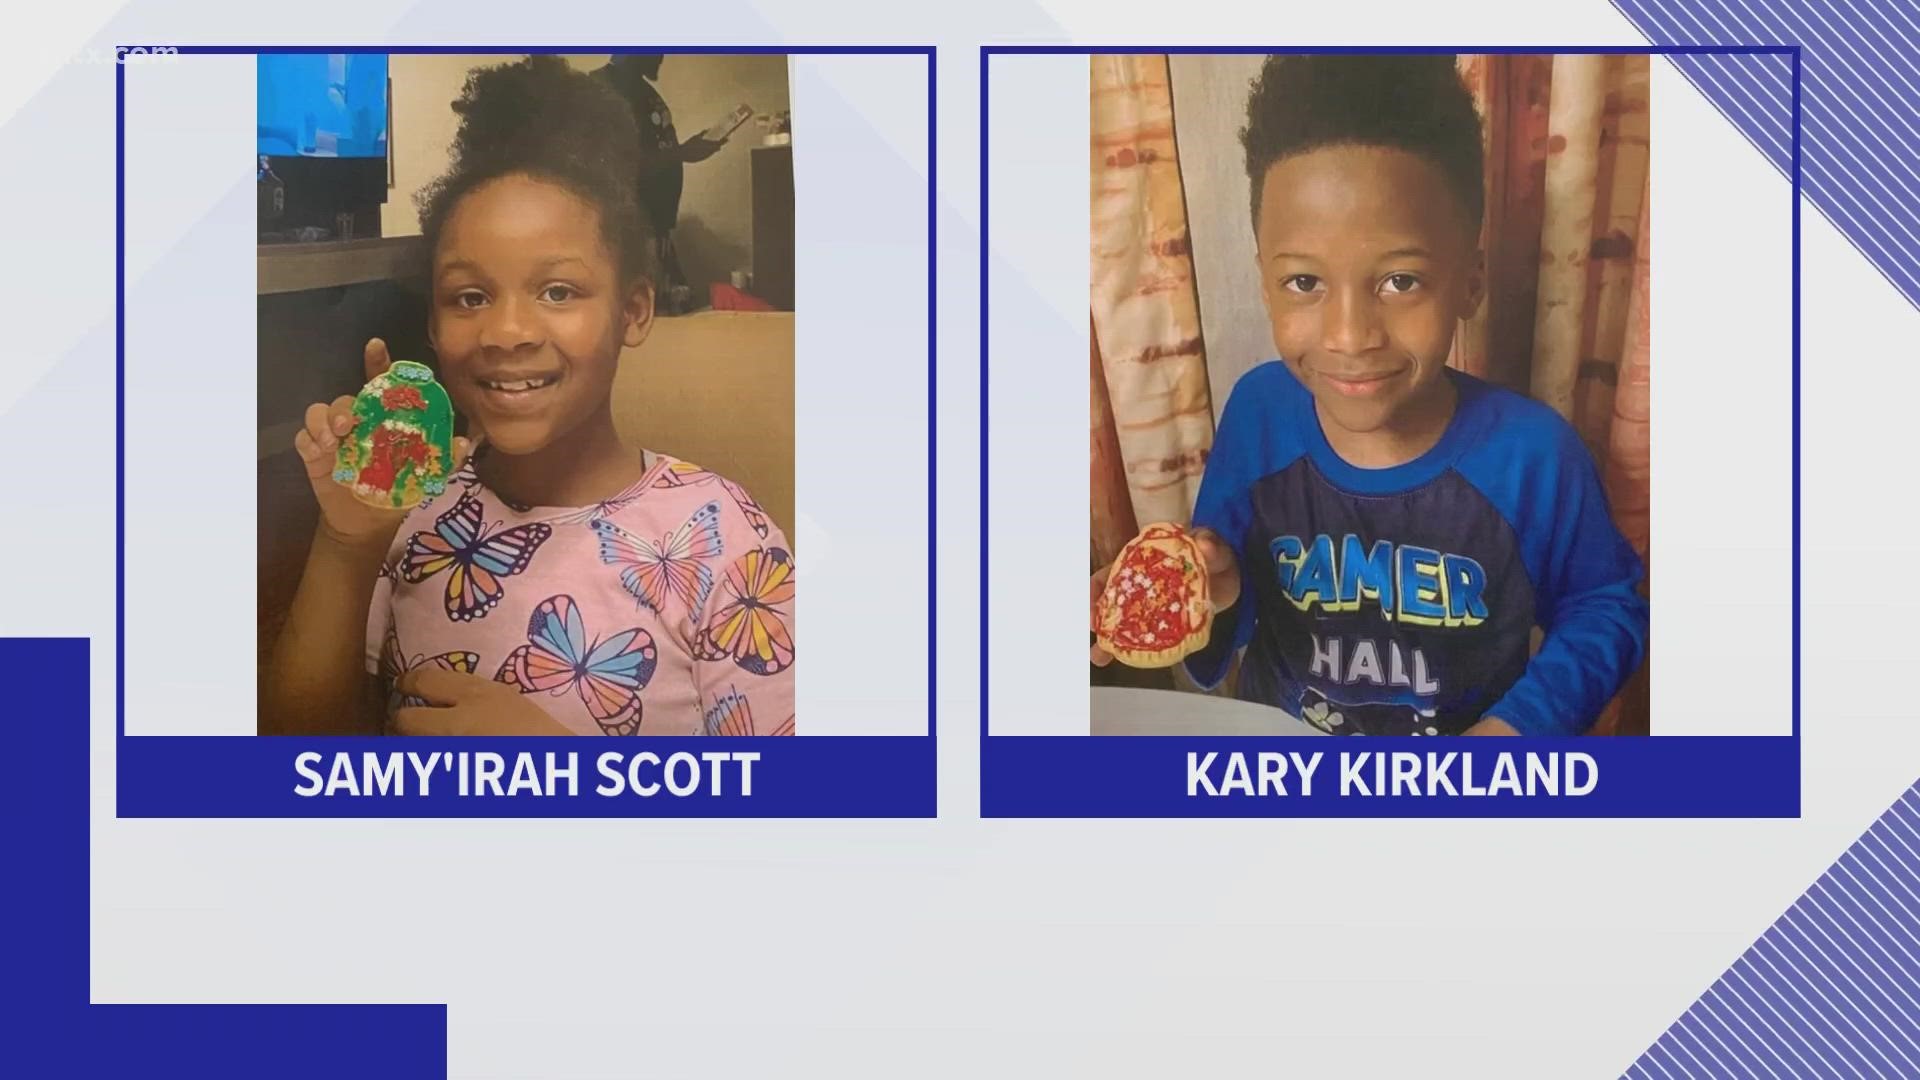 Earlier in the evening, the Orangeburg Department of Public Safety said the two missing children, ages 8 and 9, were considered endangered.